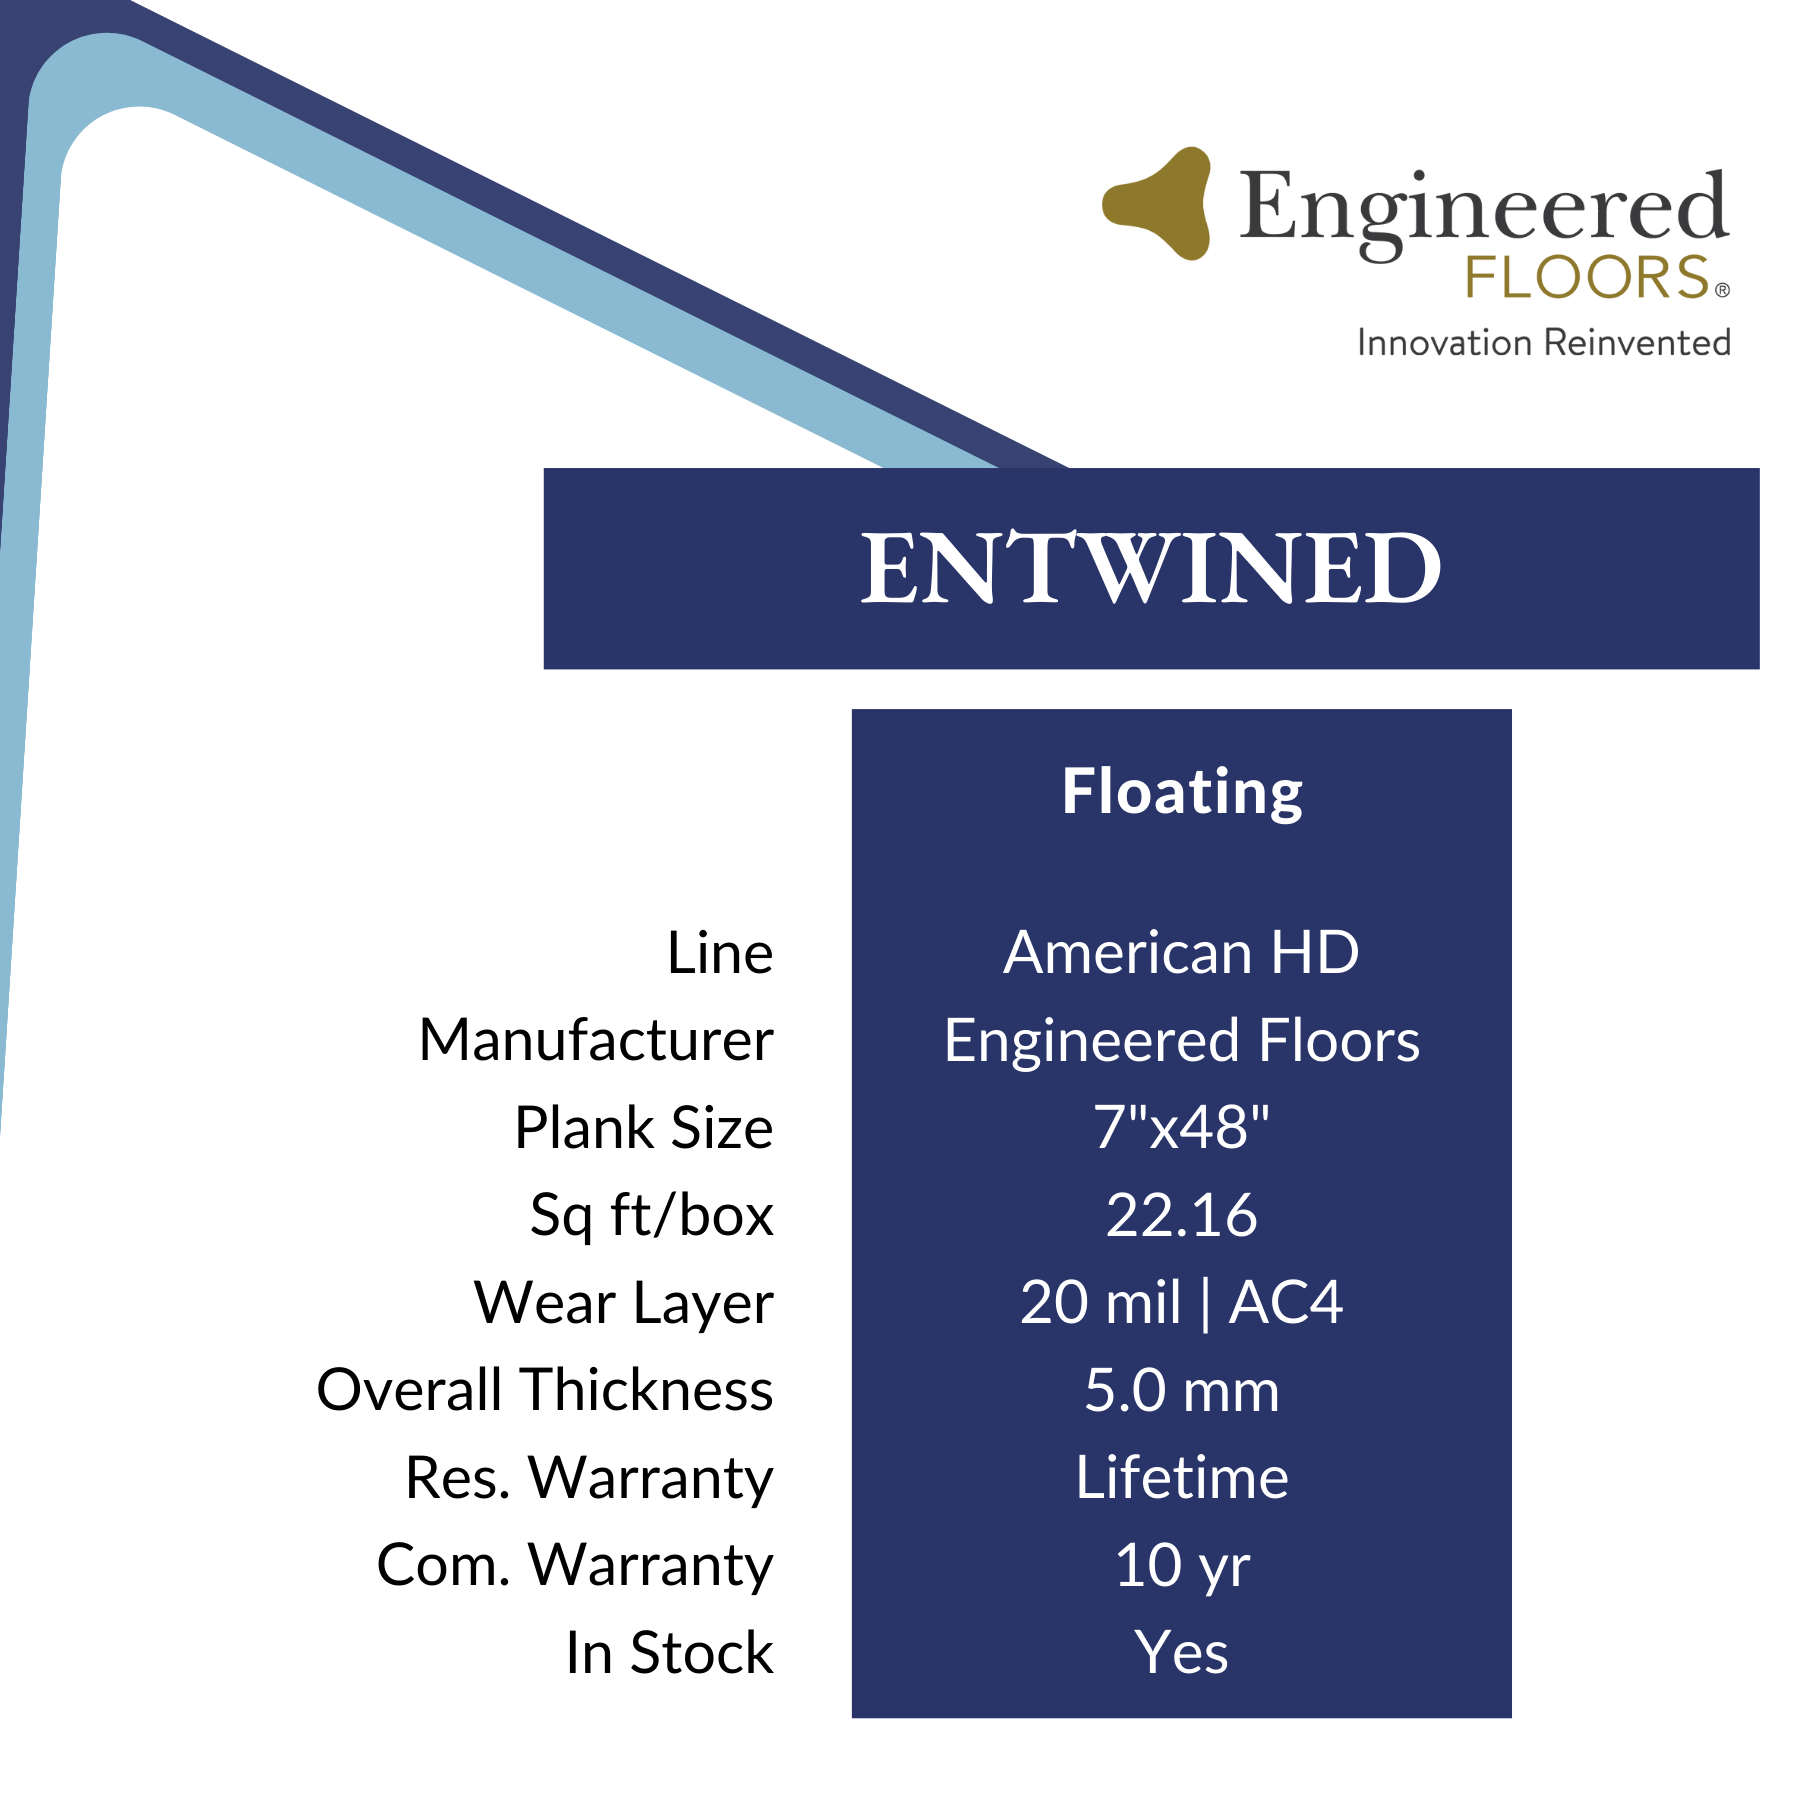 Entwined HD by Engineered Floors, Luxury Vinyl Flooring from Calhoun's Springfield, IL Specs